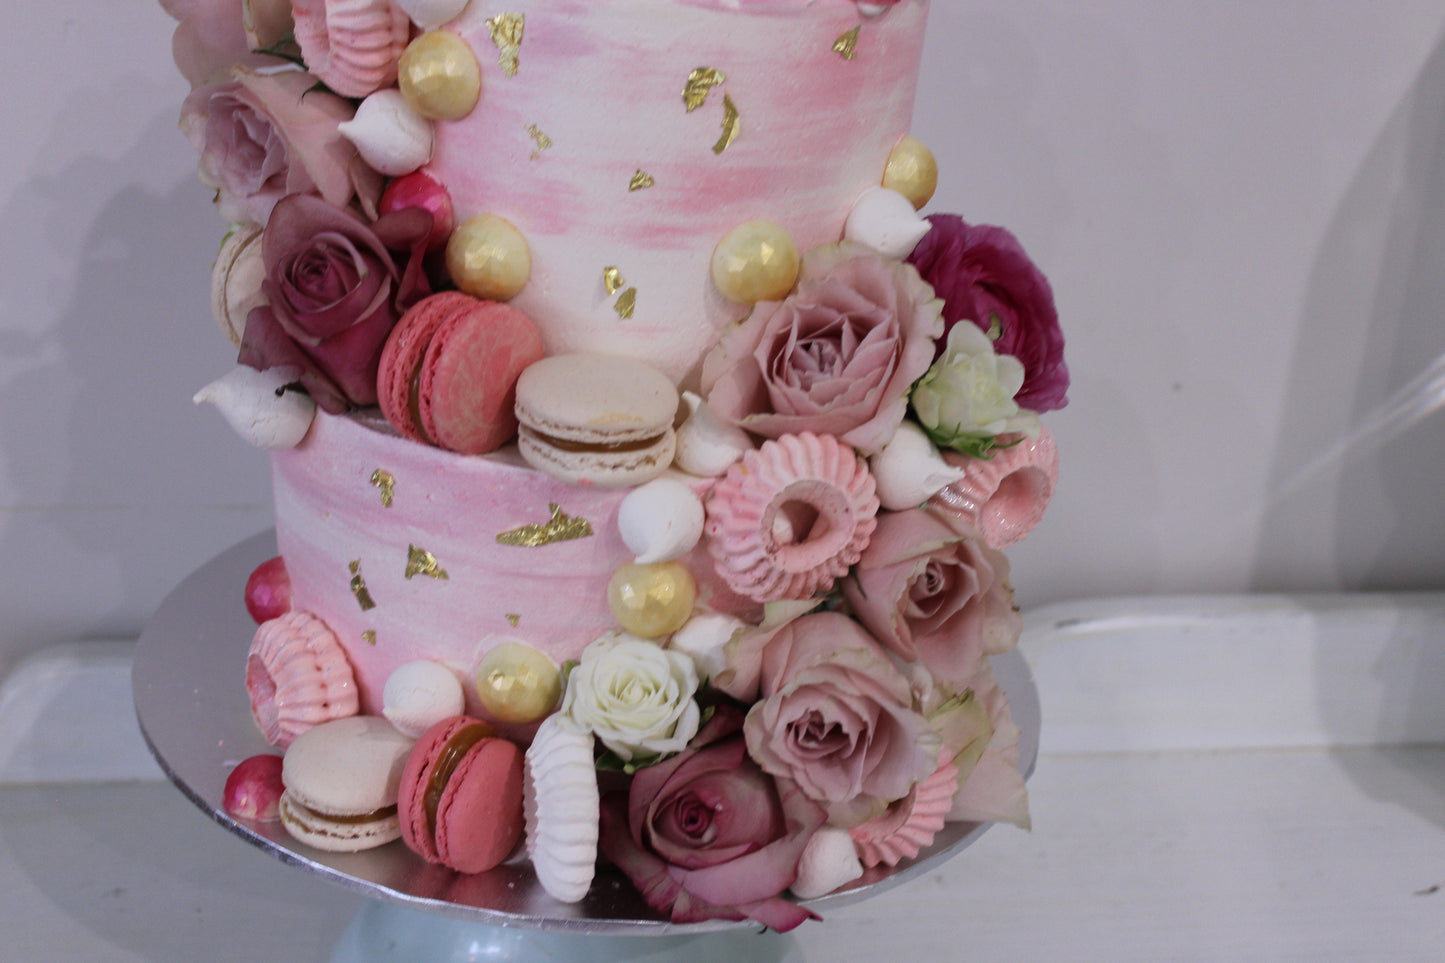 2 Tier Pink Buttercream, With Tones of Pink Decorations